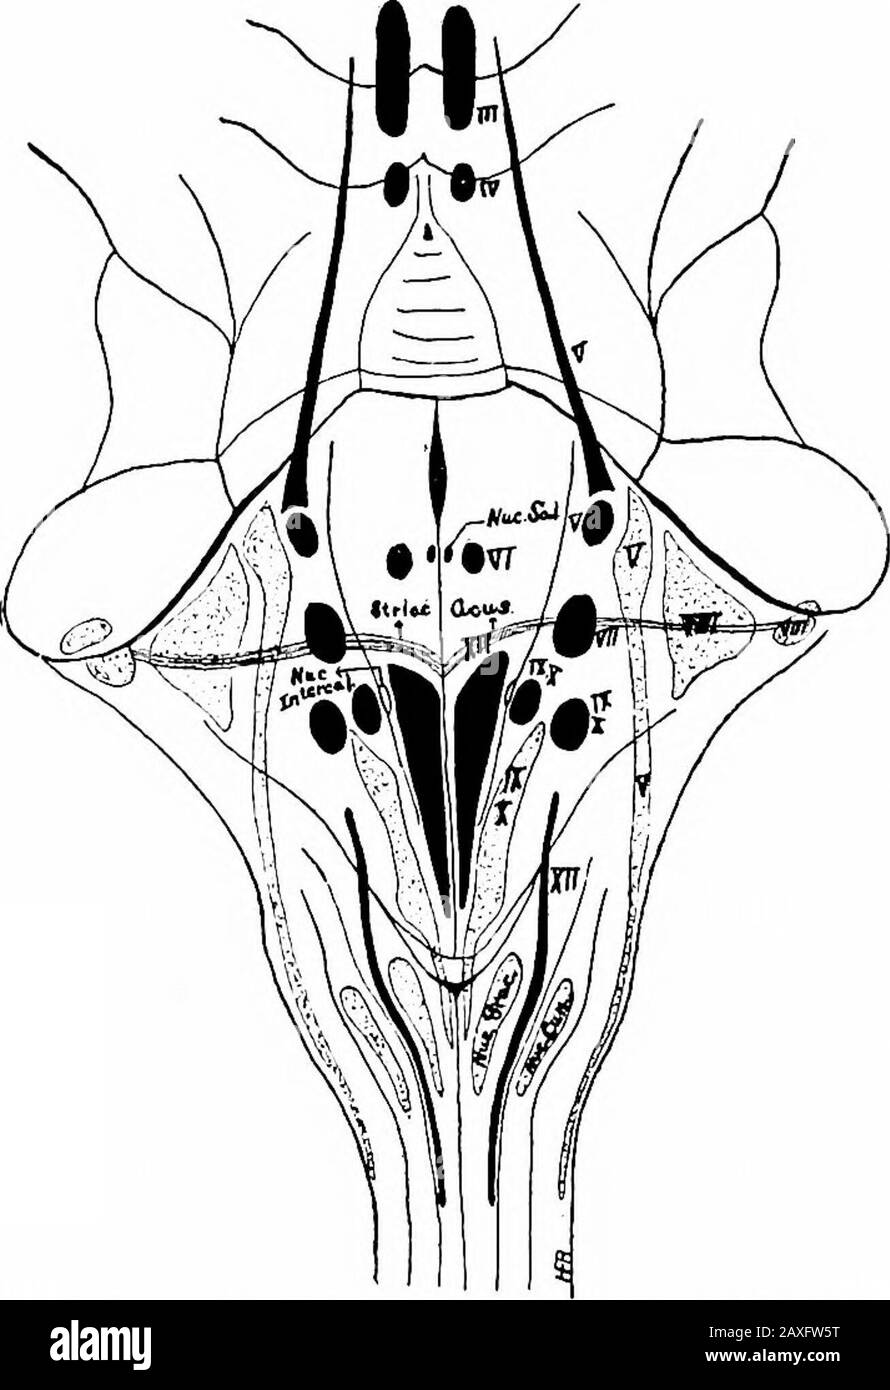 A manual of anatomy . ve a longitudinal course. In the area just dorsal to the pons fibers are the pyramids, twolarge compact bundles of longitudinal fibers on their way to theoblongata. Some of these fibers terminate in the nuclei pontisrepresenting cerebropontile fibers. Dorsal to the pyramids are seen avariable number of deeper transverse pontile fibers. The arcuatefibers and nuclei of the oblongata are analogous to the pons fibers andpontile nuclei. Dorsal to the pons lie the fibers of the medial lemniscus forming a26 402 THE NERVE SYSTEM rather compact bundle upon each side of the raphe. Stock Photo